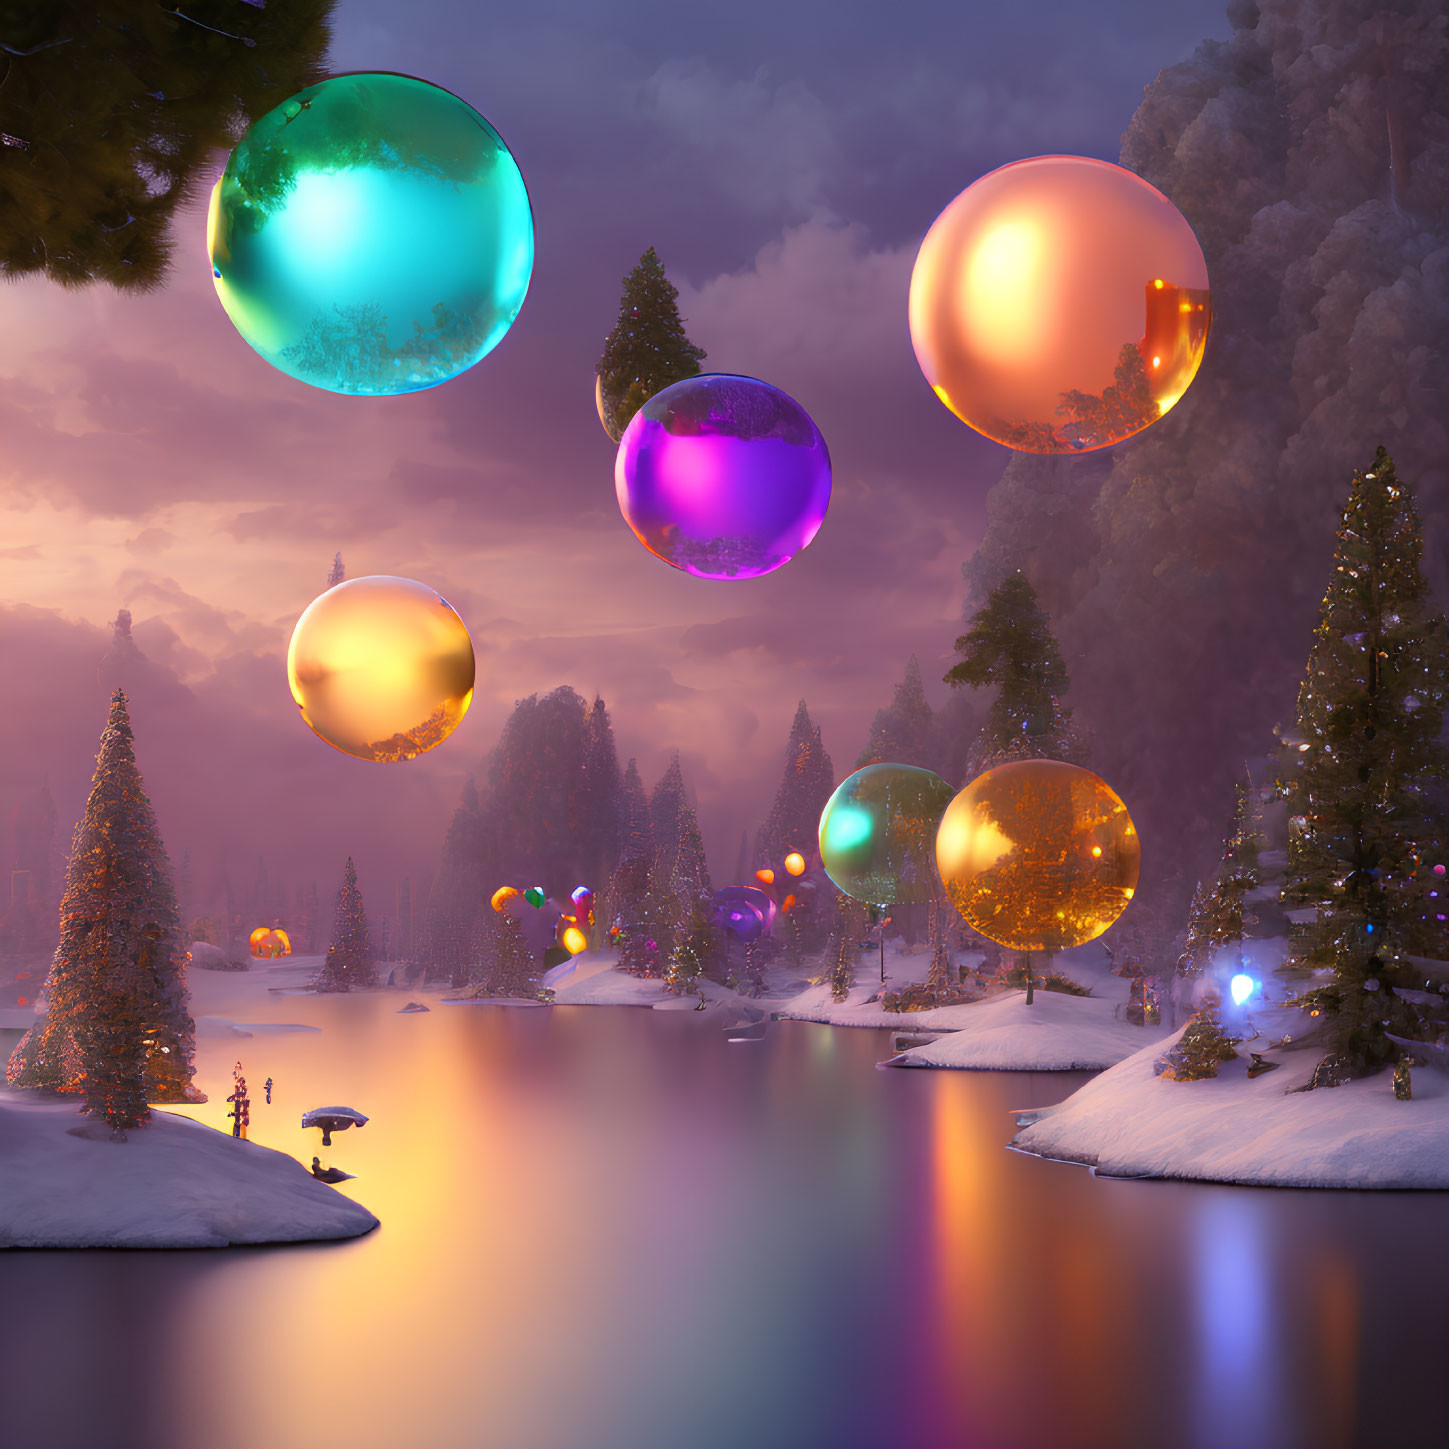 Winter landscape with colorful orbs over lake and snow-covered trees